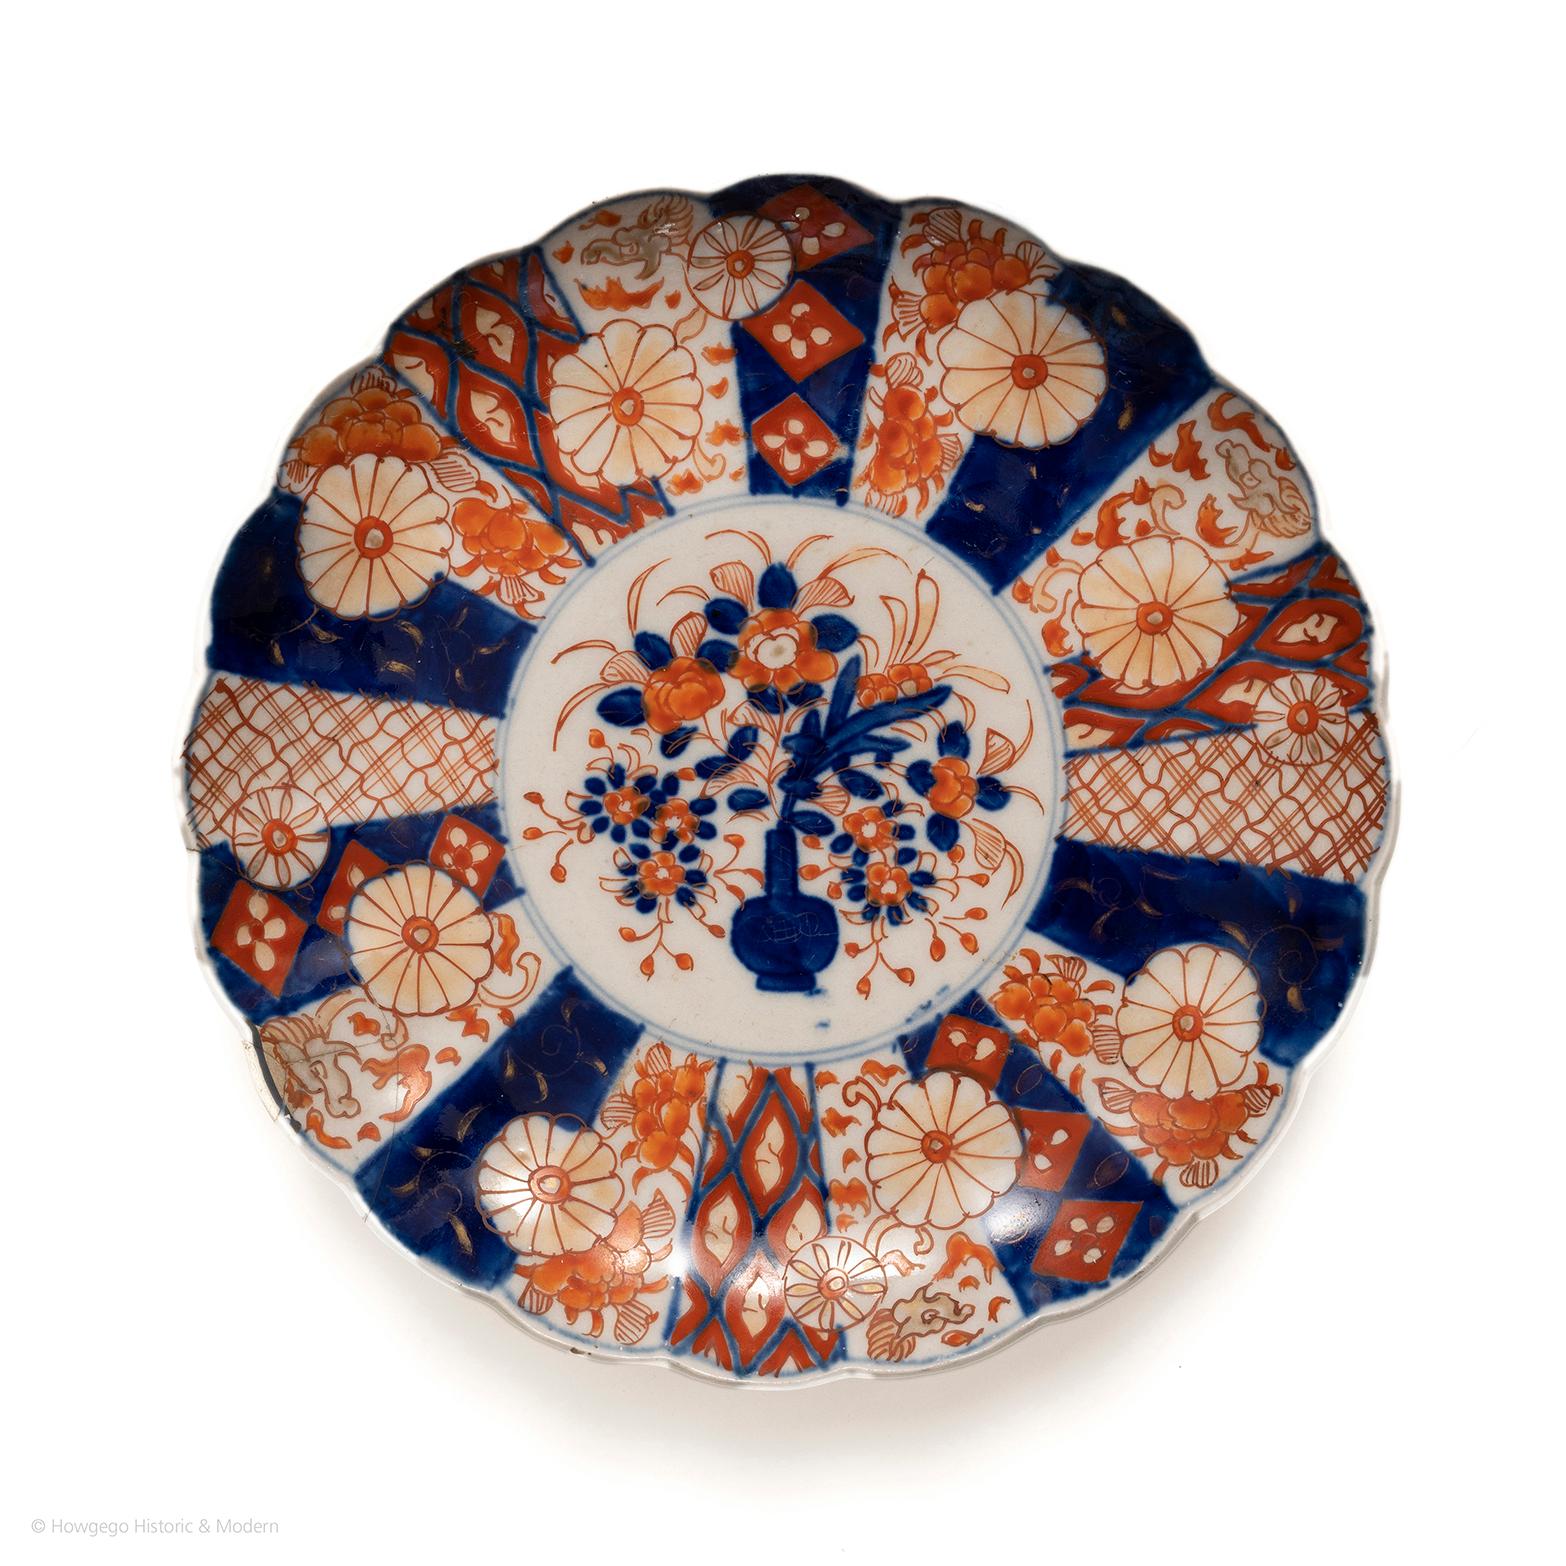 A charming 18th century Imari lobed plate with dragon ornamentation. Beautifully painted with a vase and profusion of flowers surrounded by a double circle border. The outer border with elaborate vignettes with dragon heads, flowers and trellis